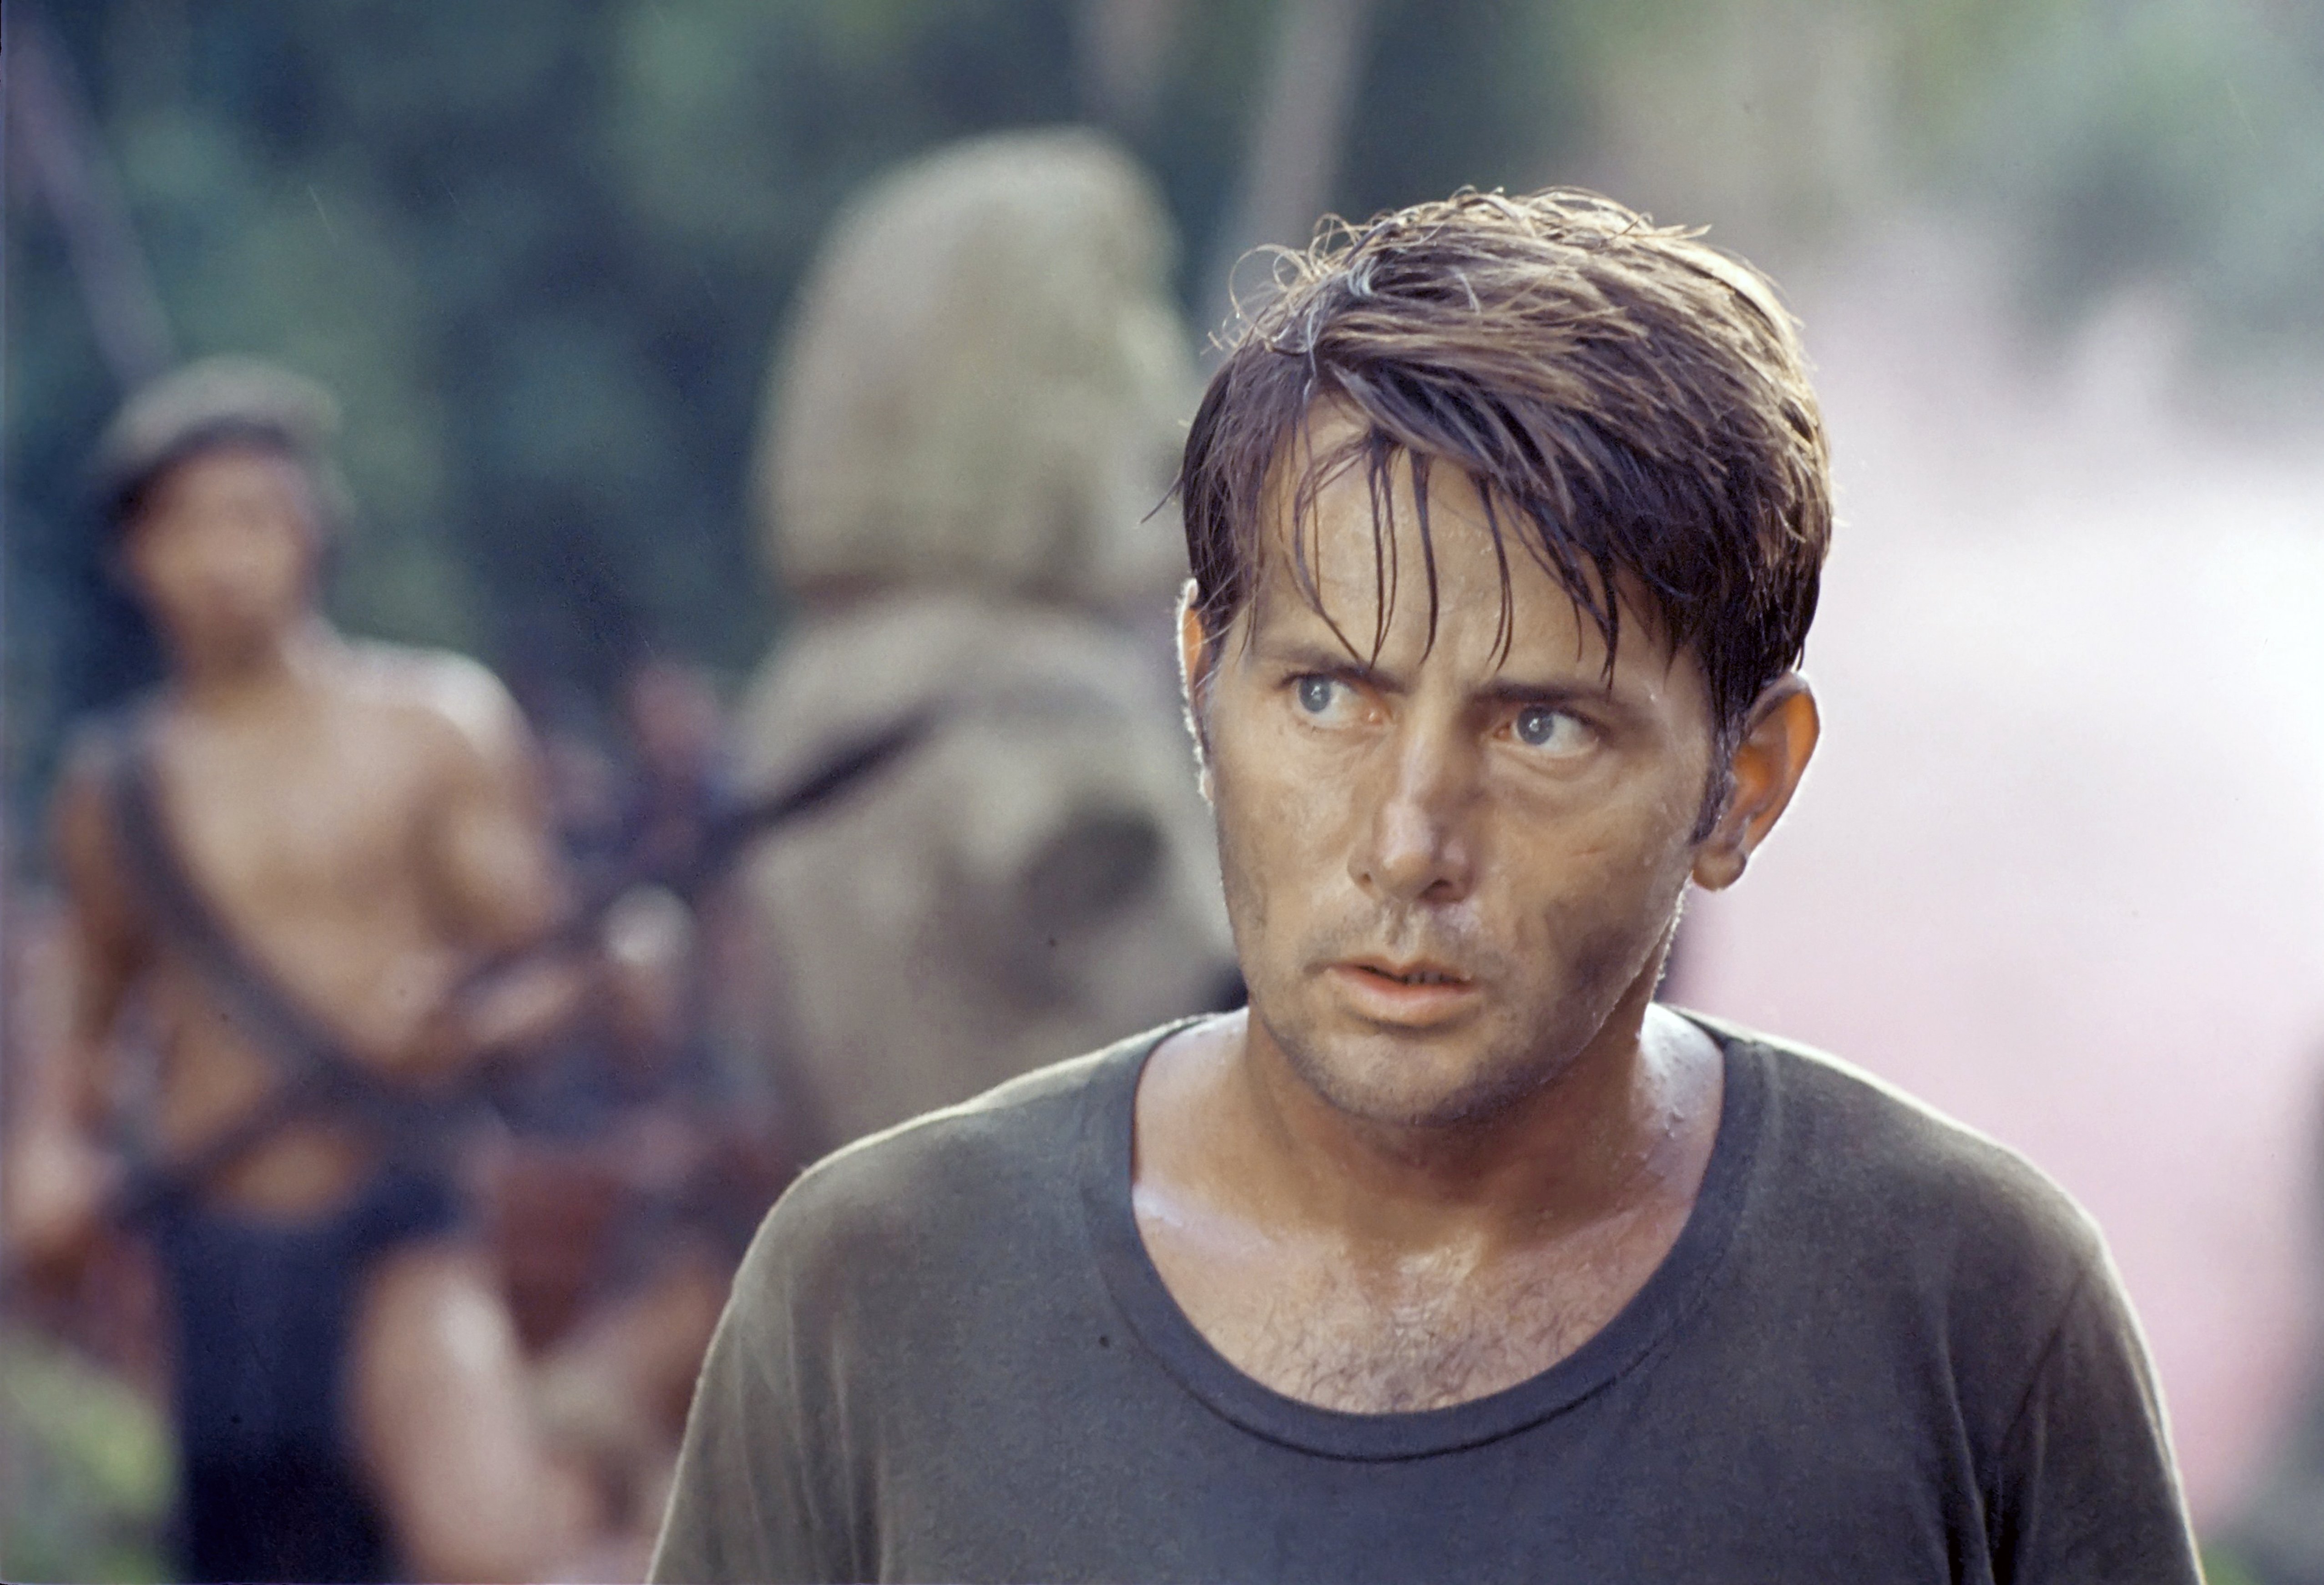 Martin Sheen pictured on the set of the film "Apocalypse Now," as Captain Benjamin L. Willard. / Source: Getty Images